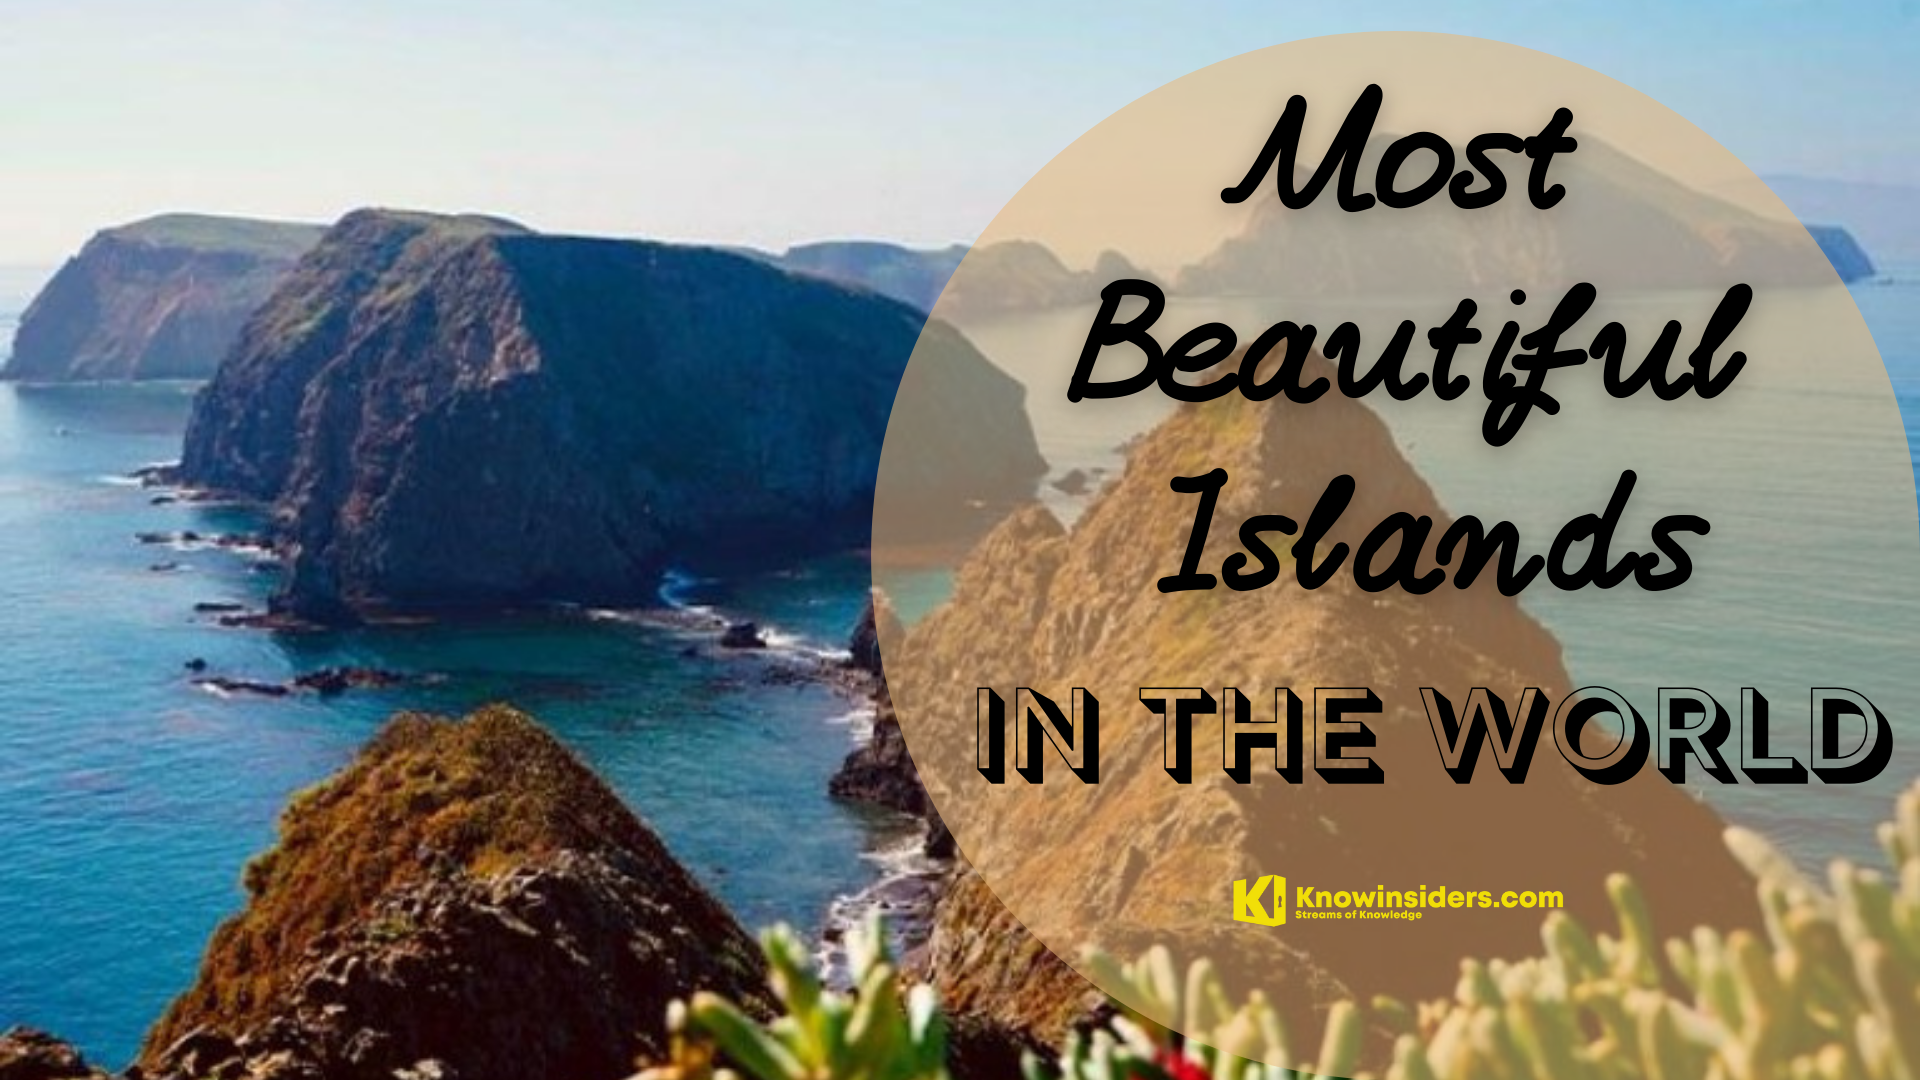 Most Beautiful Islands In The World. Photo: Knowinsiders.